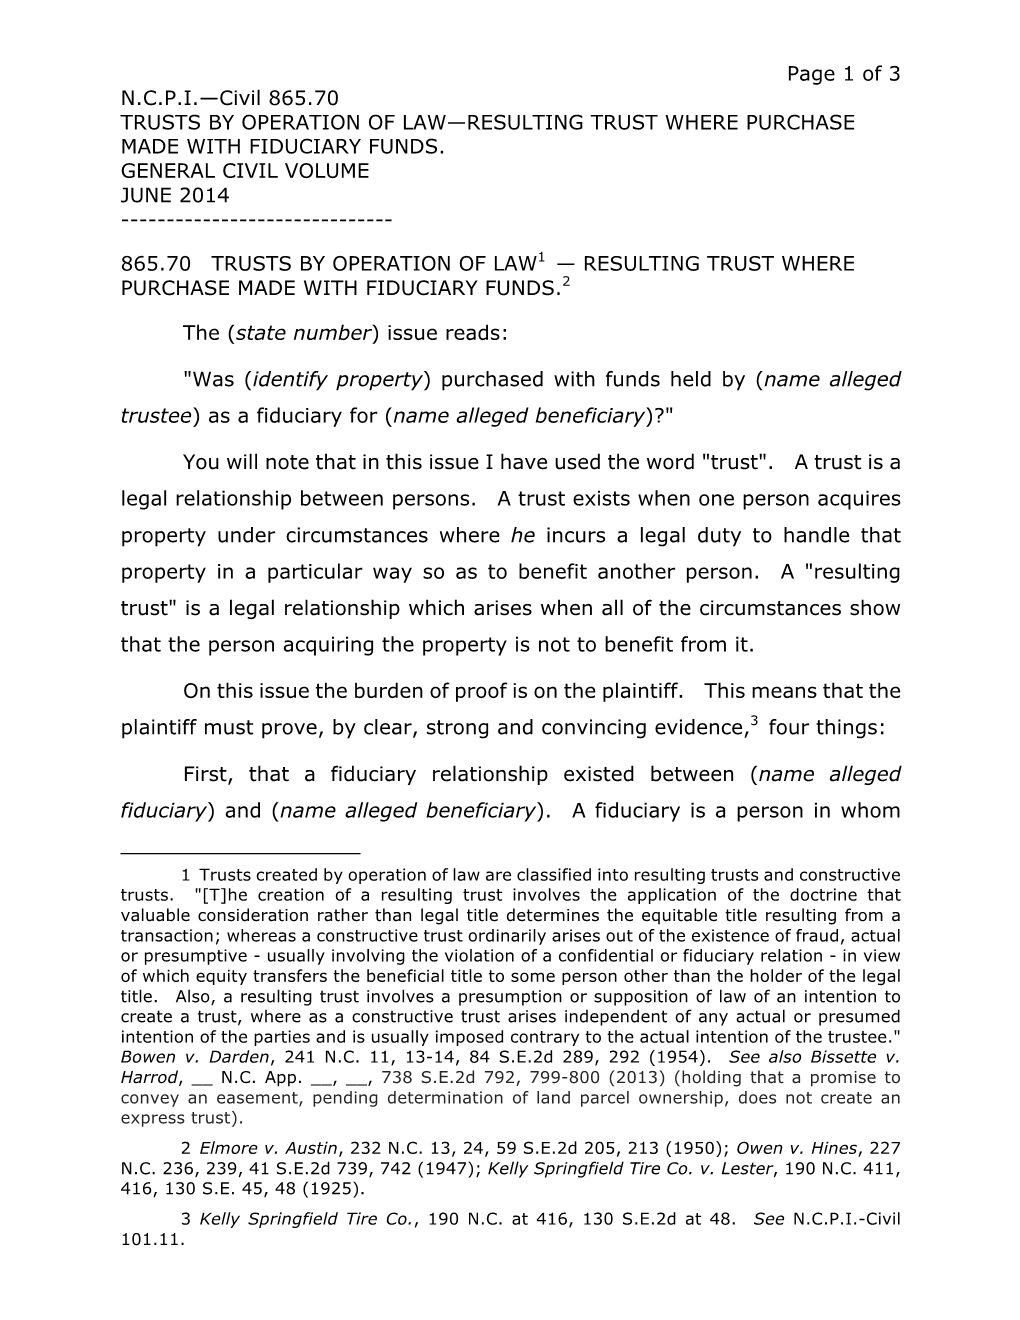 Page 1 of 3 N.C.P.I.—Civil 865.70 TRUSTS by OPERATION of LAW—RESULTING TRUST WHERE PURCHASE MADE with FIDUCIARY FUNDS. GENERAL CIVIL VOLUME JUNE 2014